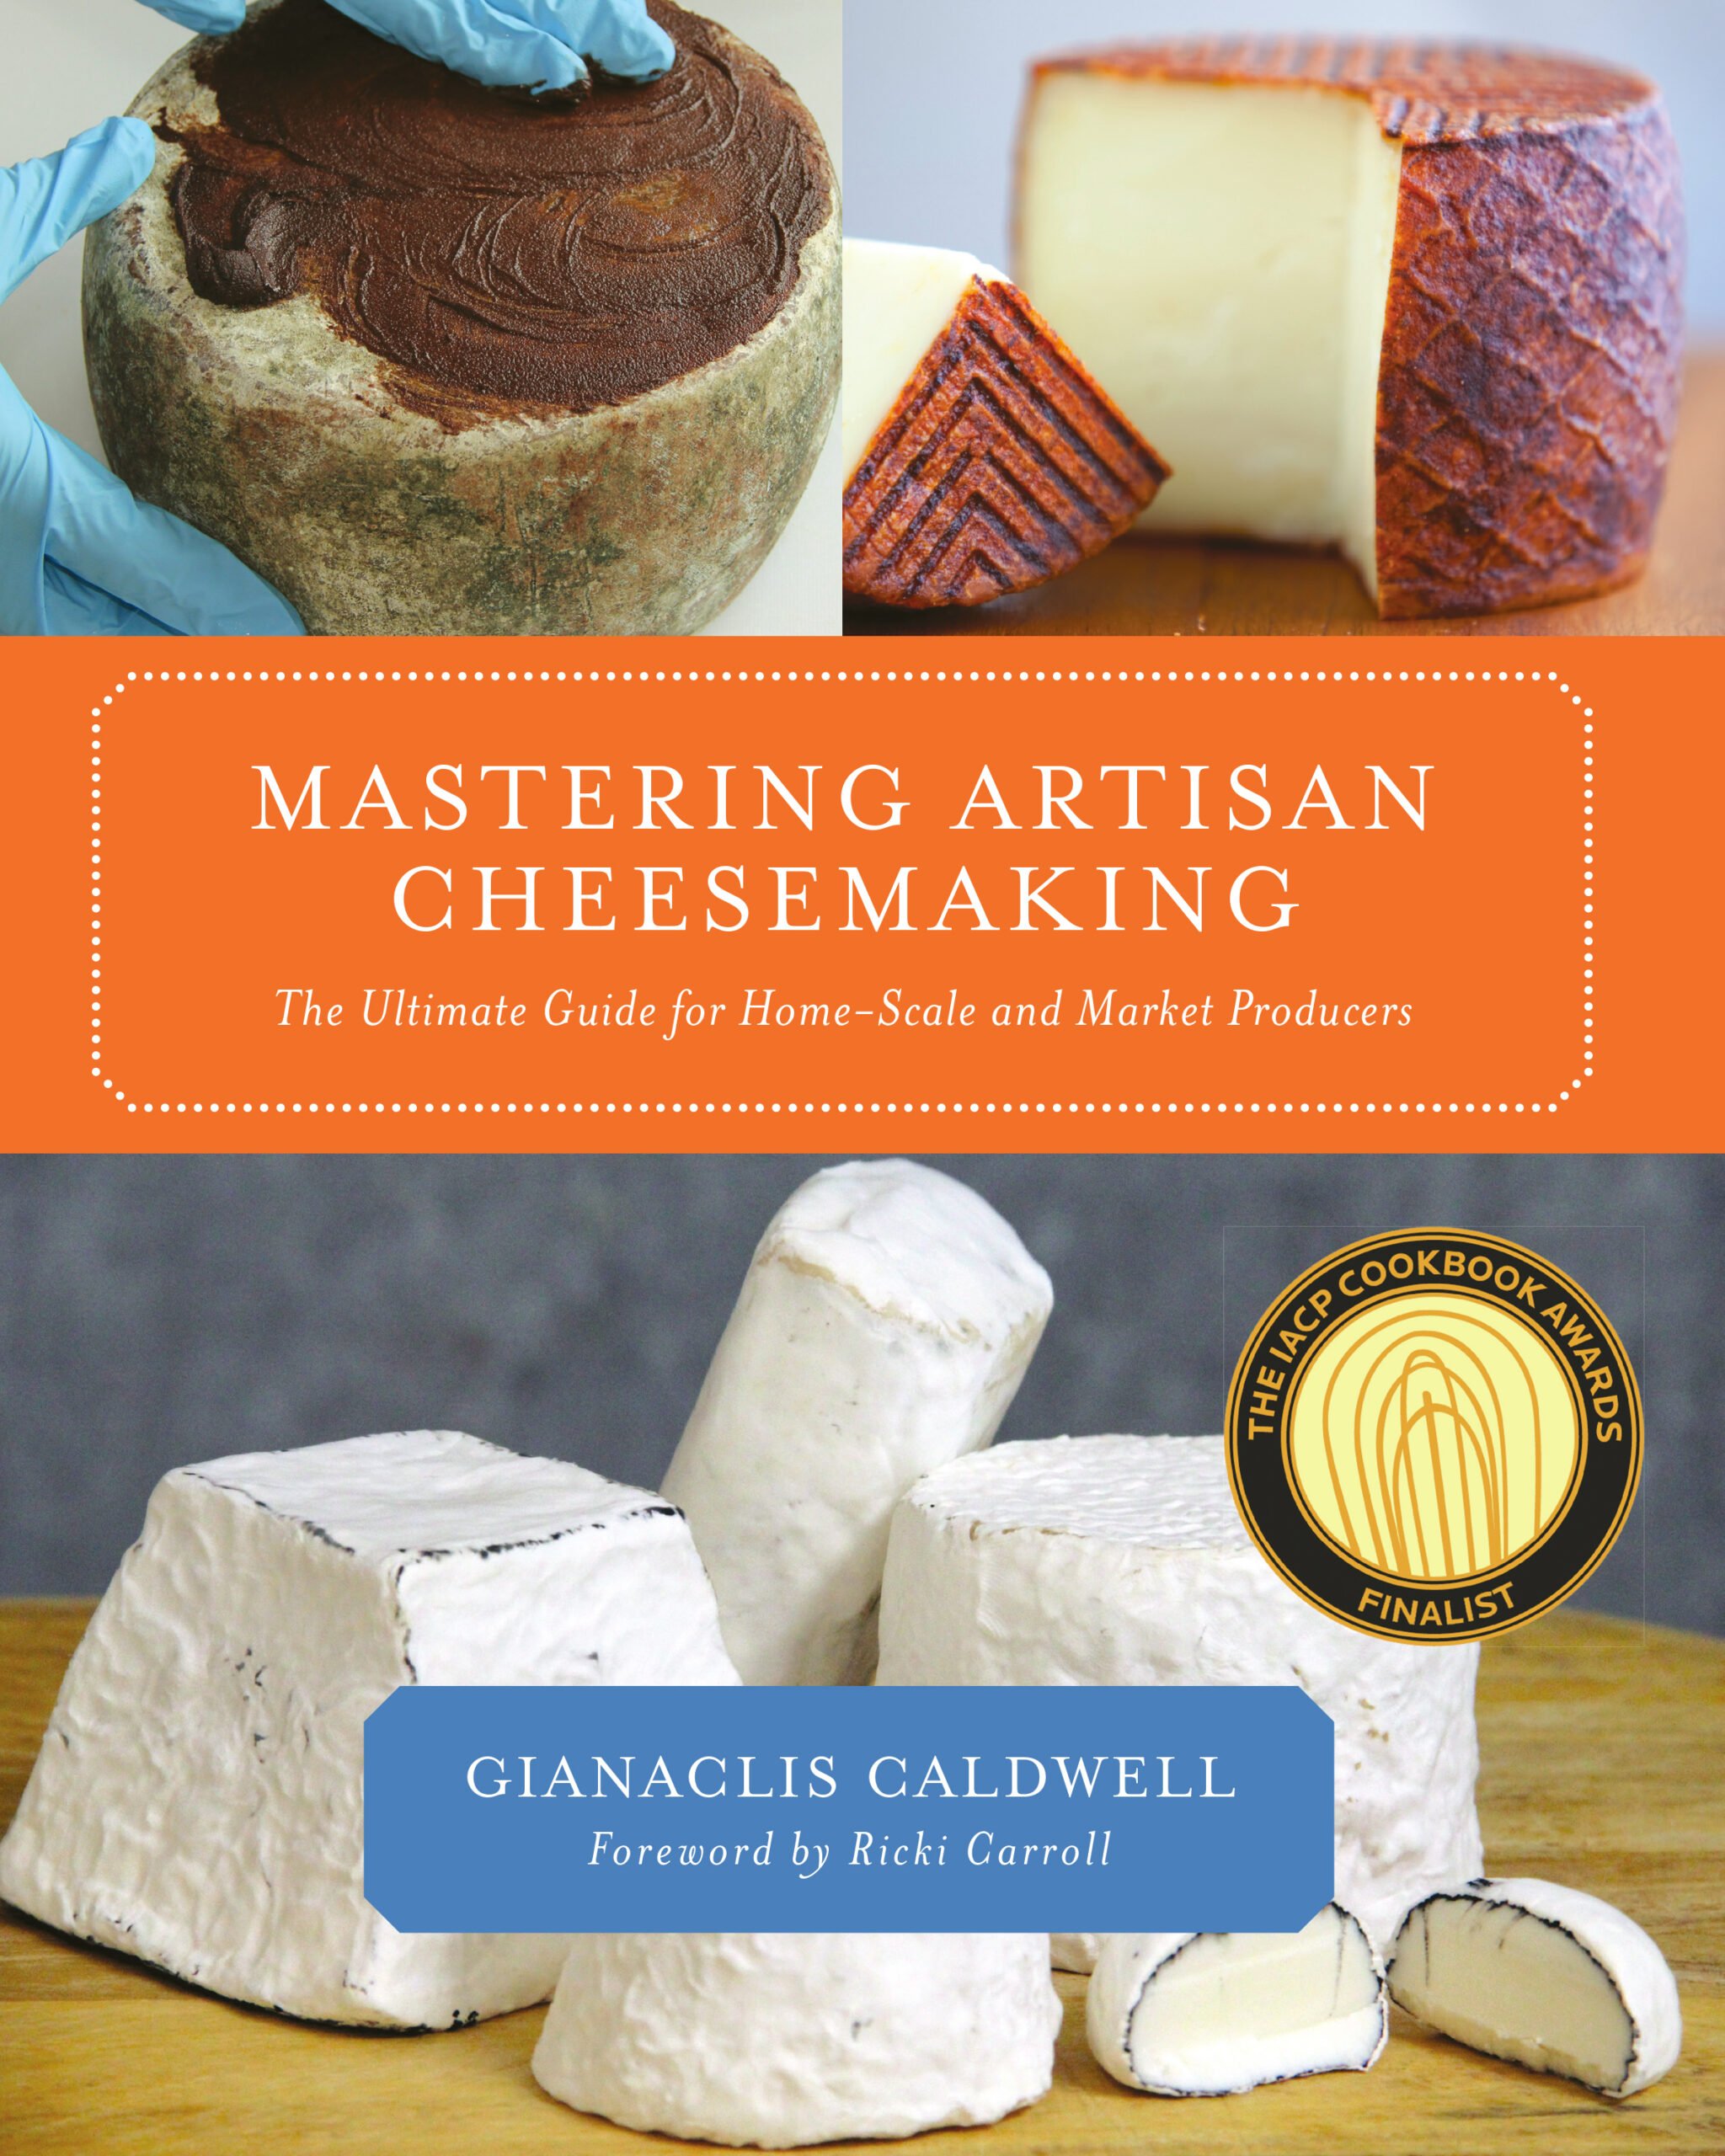 Home Cheese Making Supplies: Essential Tools for DIY Dairy Enthusiasts